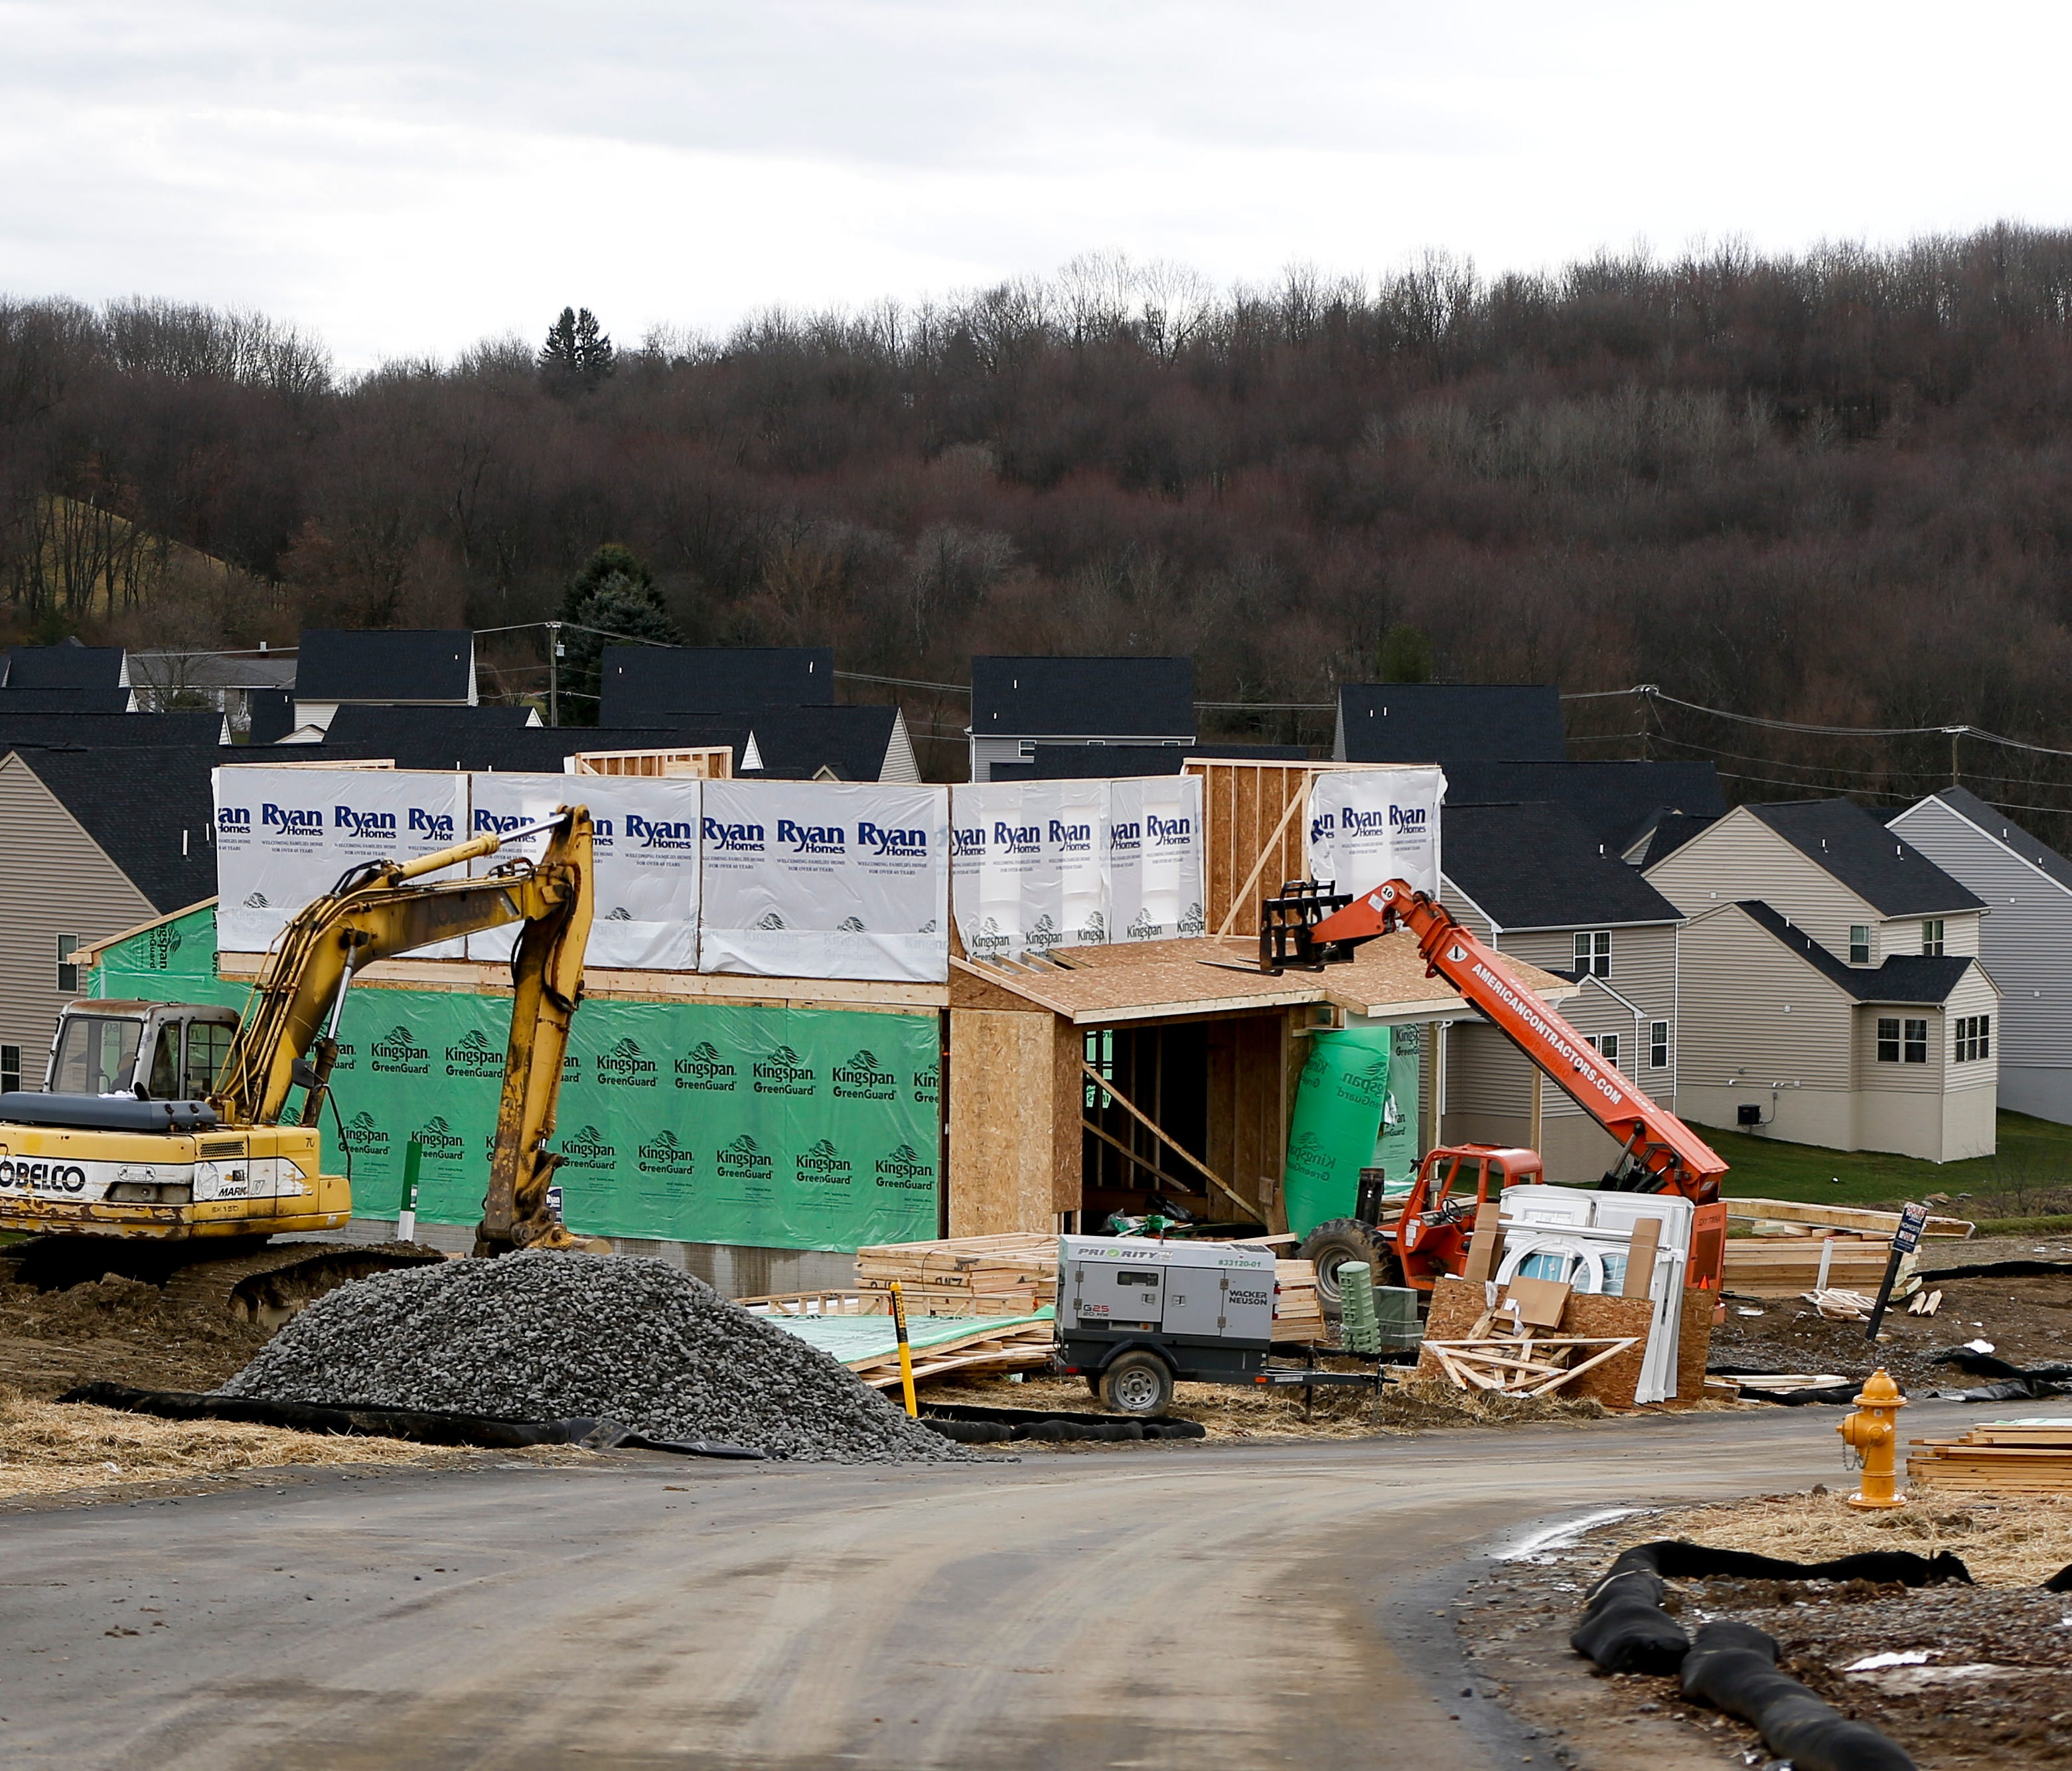 In this March 1, 2017, photo new home construction is underway in a housing plan in Zelienople, Pa. On Friday, Feb. 16, 2018, the Commerce Department reports on U.S. home construction in January. (AP Photo/Keith Srakocic)